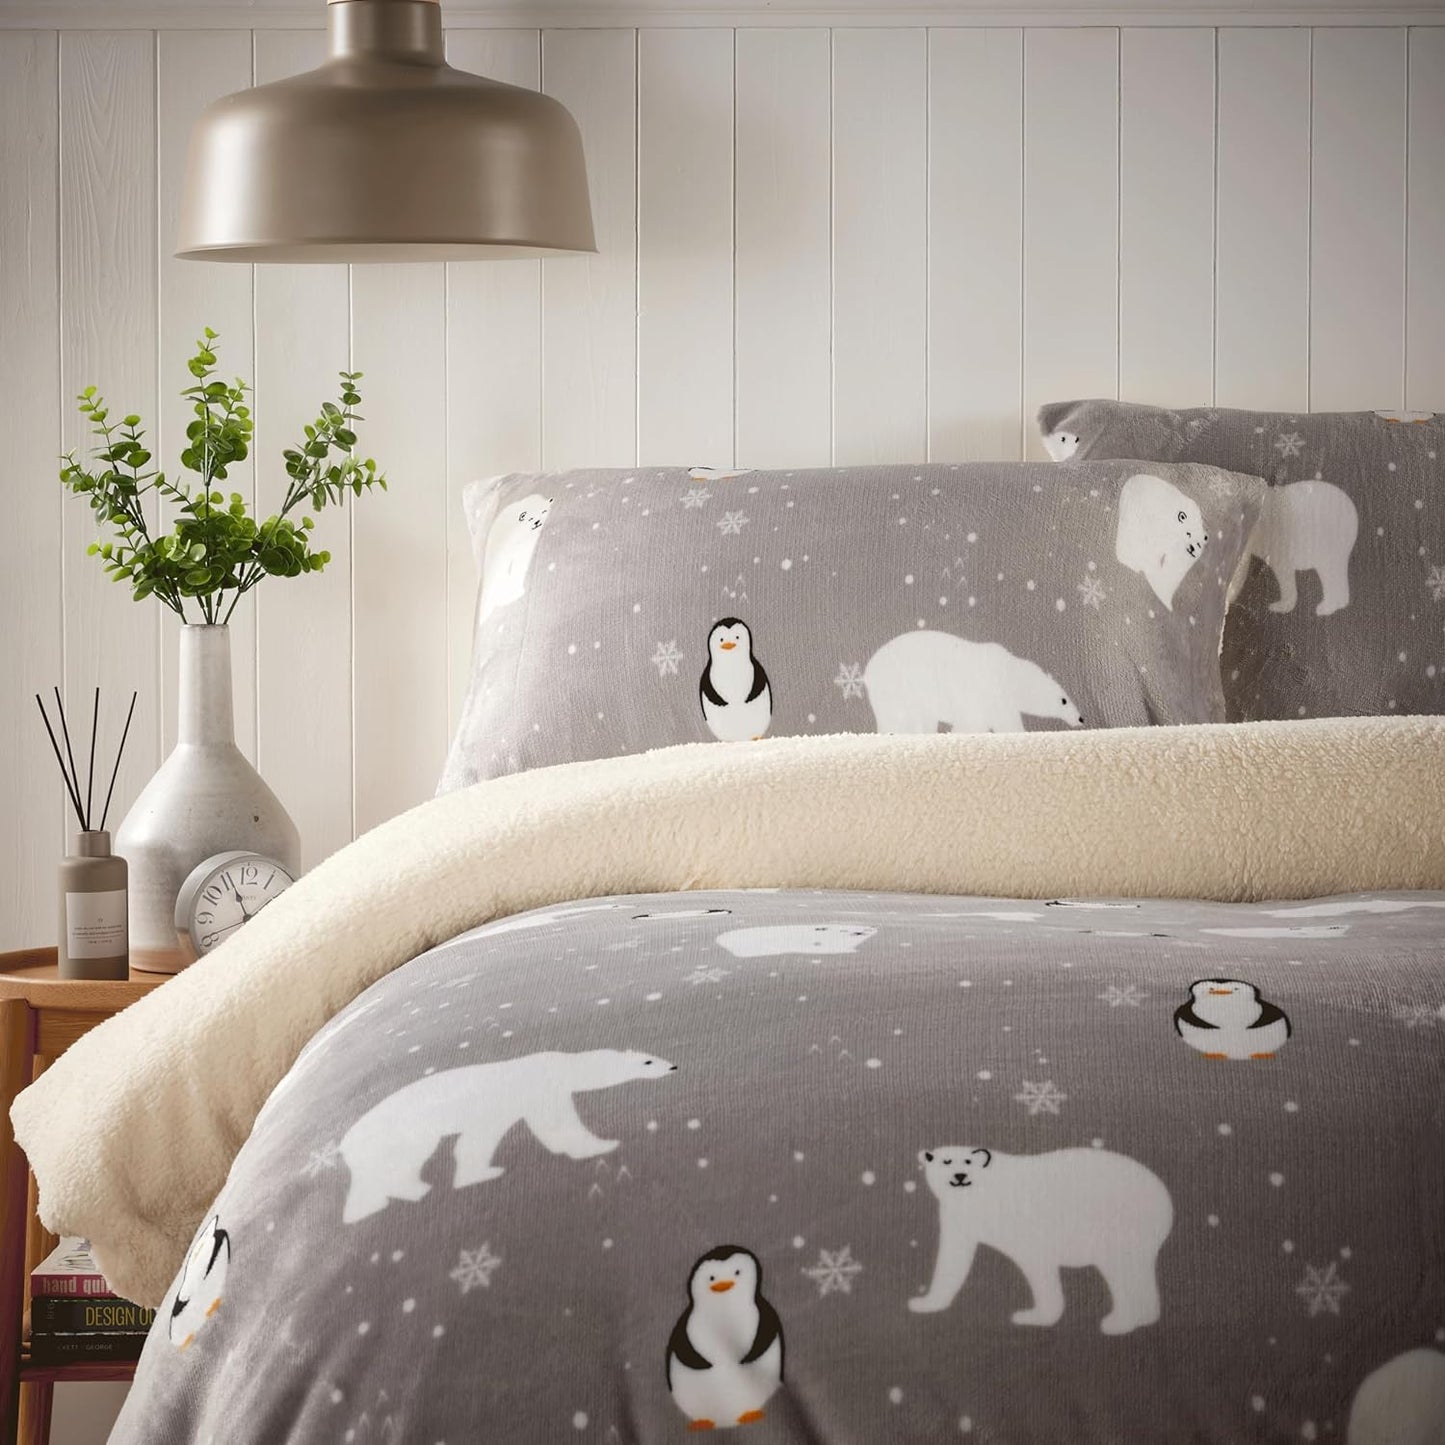 Teddy Fleece Duvet Cover Set Printed Super Soft Quilt Sets Warm Winter Bedding With Sherpa Reverse